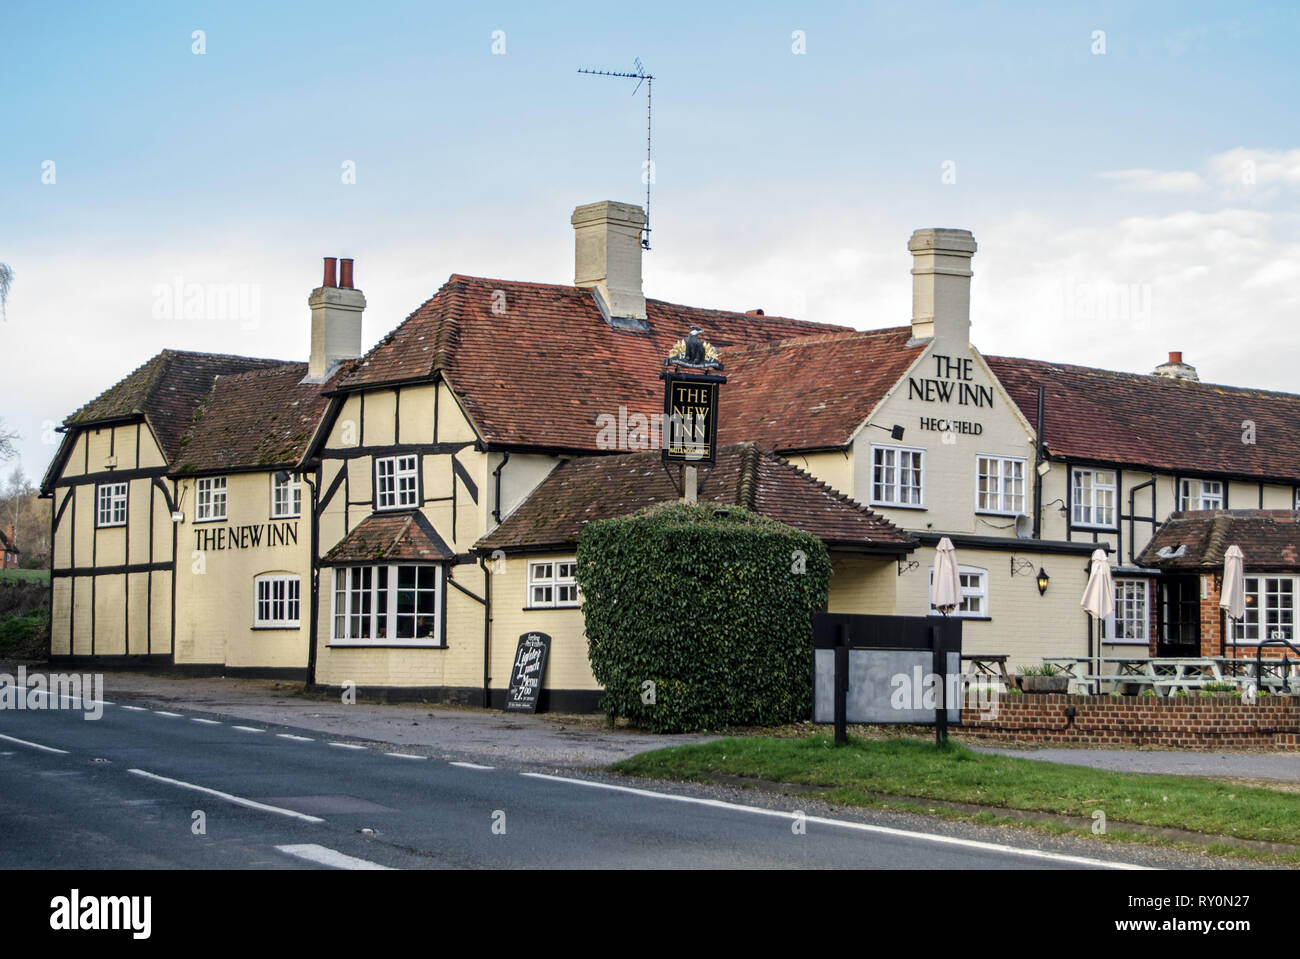 HECKFIELD, UK - MARCH 10, 2019: View of the historic coaching inn - The New Inn, Heckfield on the main Odiham to Reading road in Hampshire.  Dating ba Stock Photo